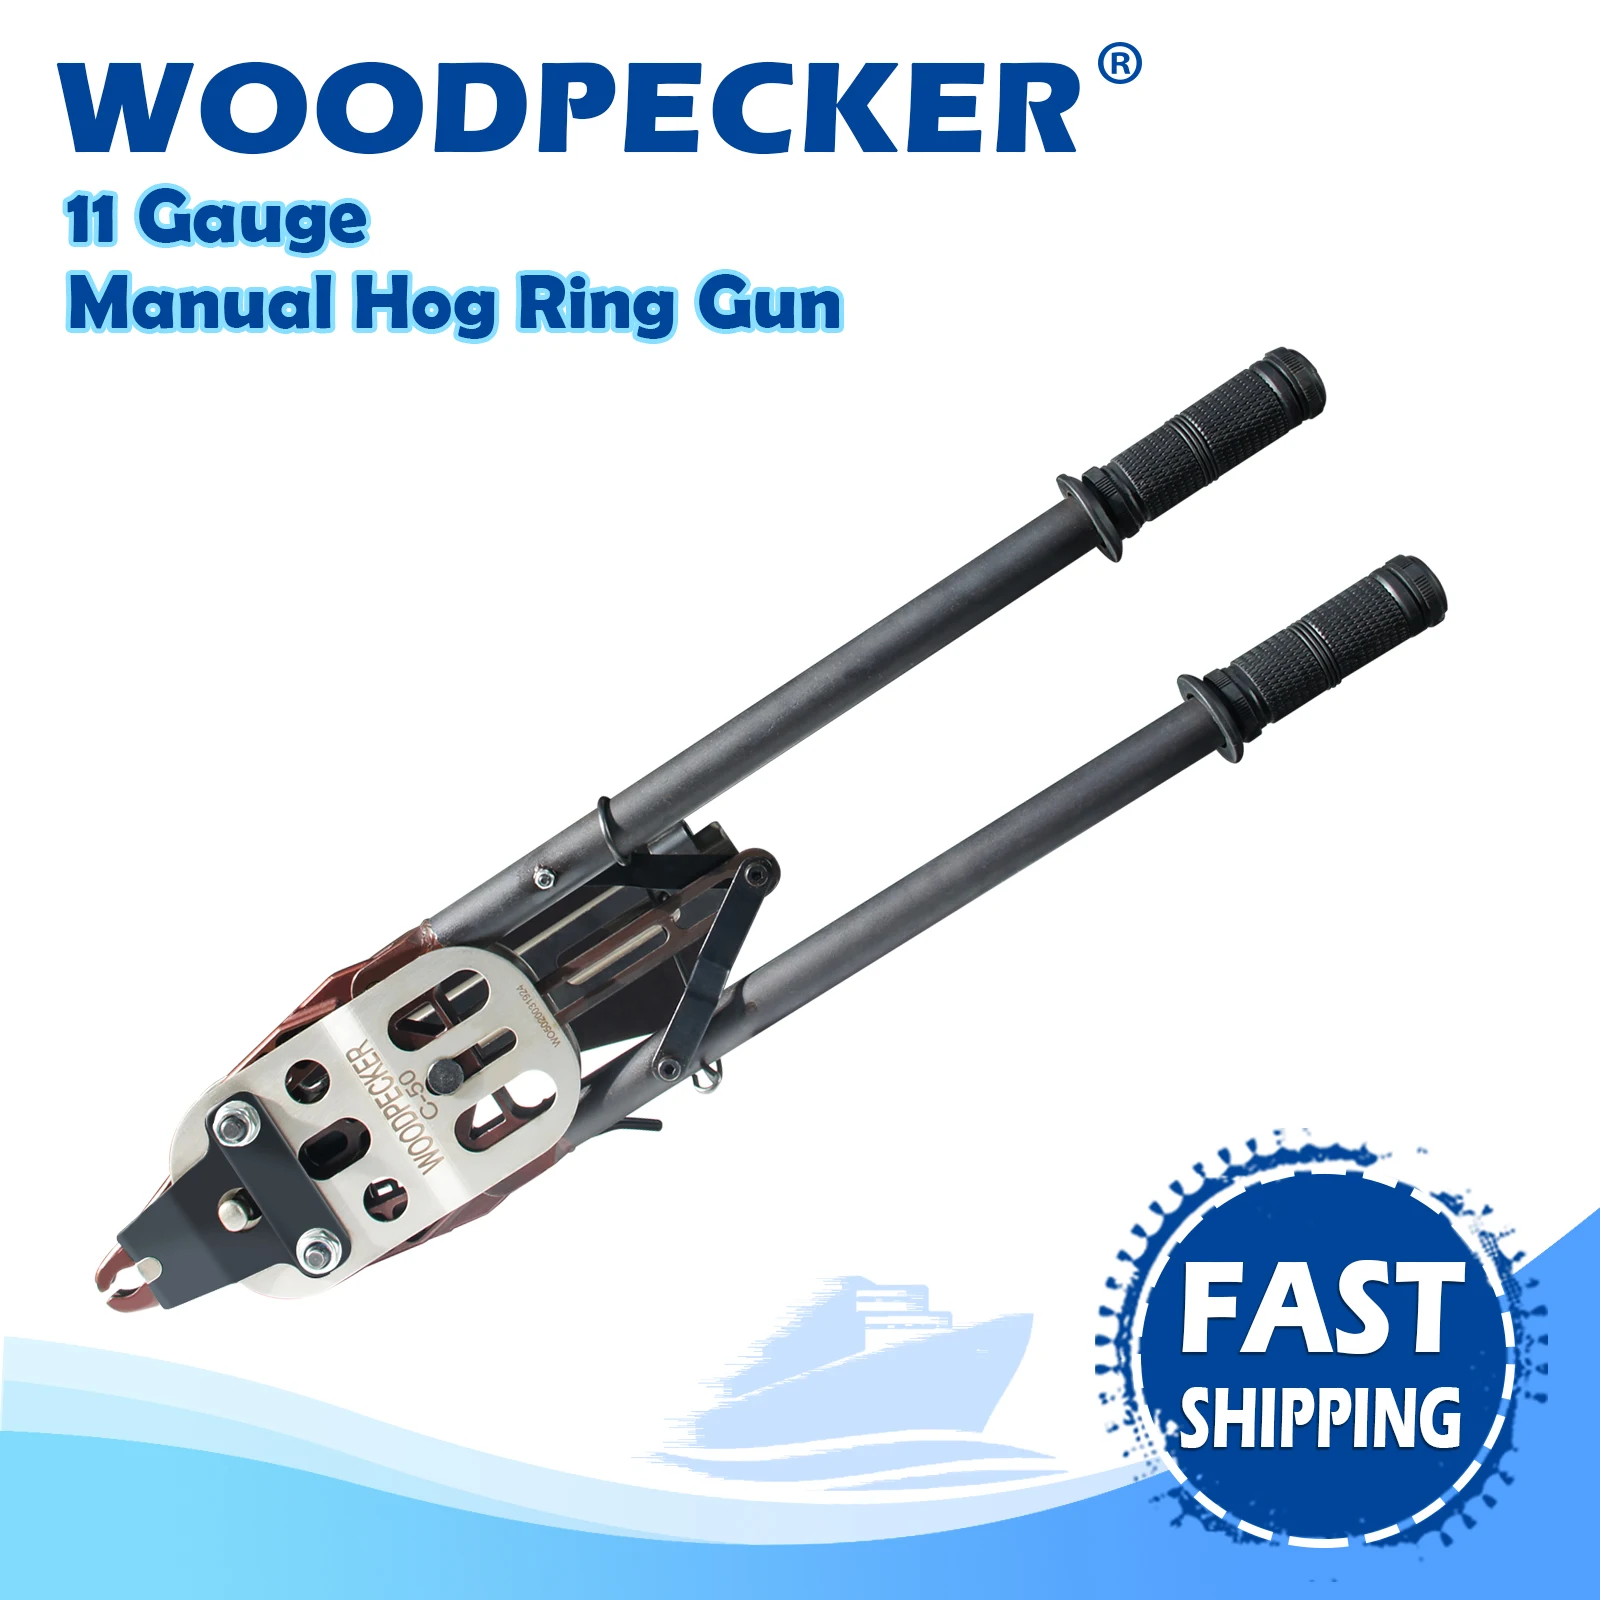 WOODPECKER C50 11 Gauge Heavy-Duty Manual Hog Ring Gun, Snap-Ring Plier with Auto-feed System, 45mm Crown for Wire Cages,Fencing china top silver sc760 16 gauge 12 5mm inner crown galvanized steel hog ring staples for fencing wire cages car seats